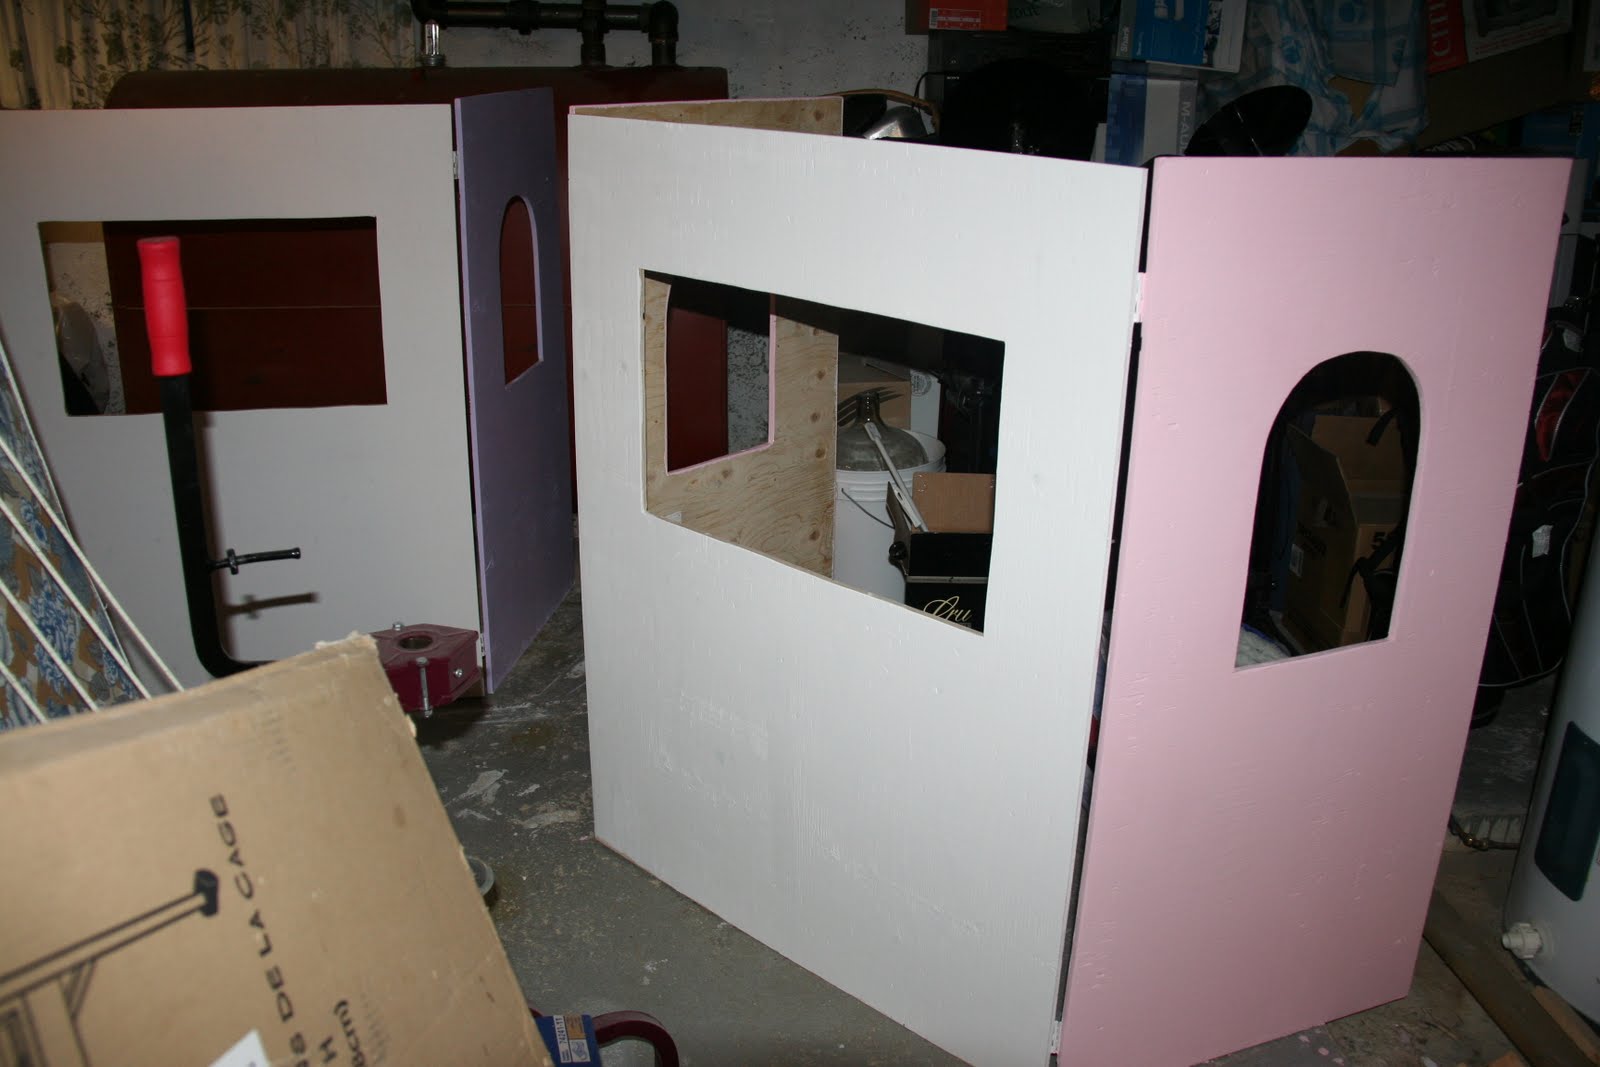 The M & B Chronicles: Homemade Puppet Theatres